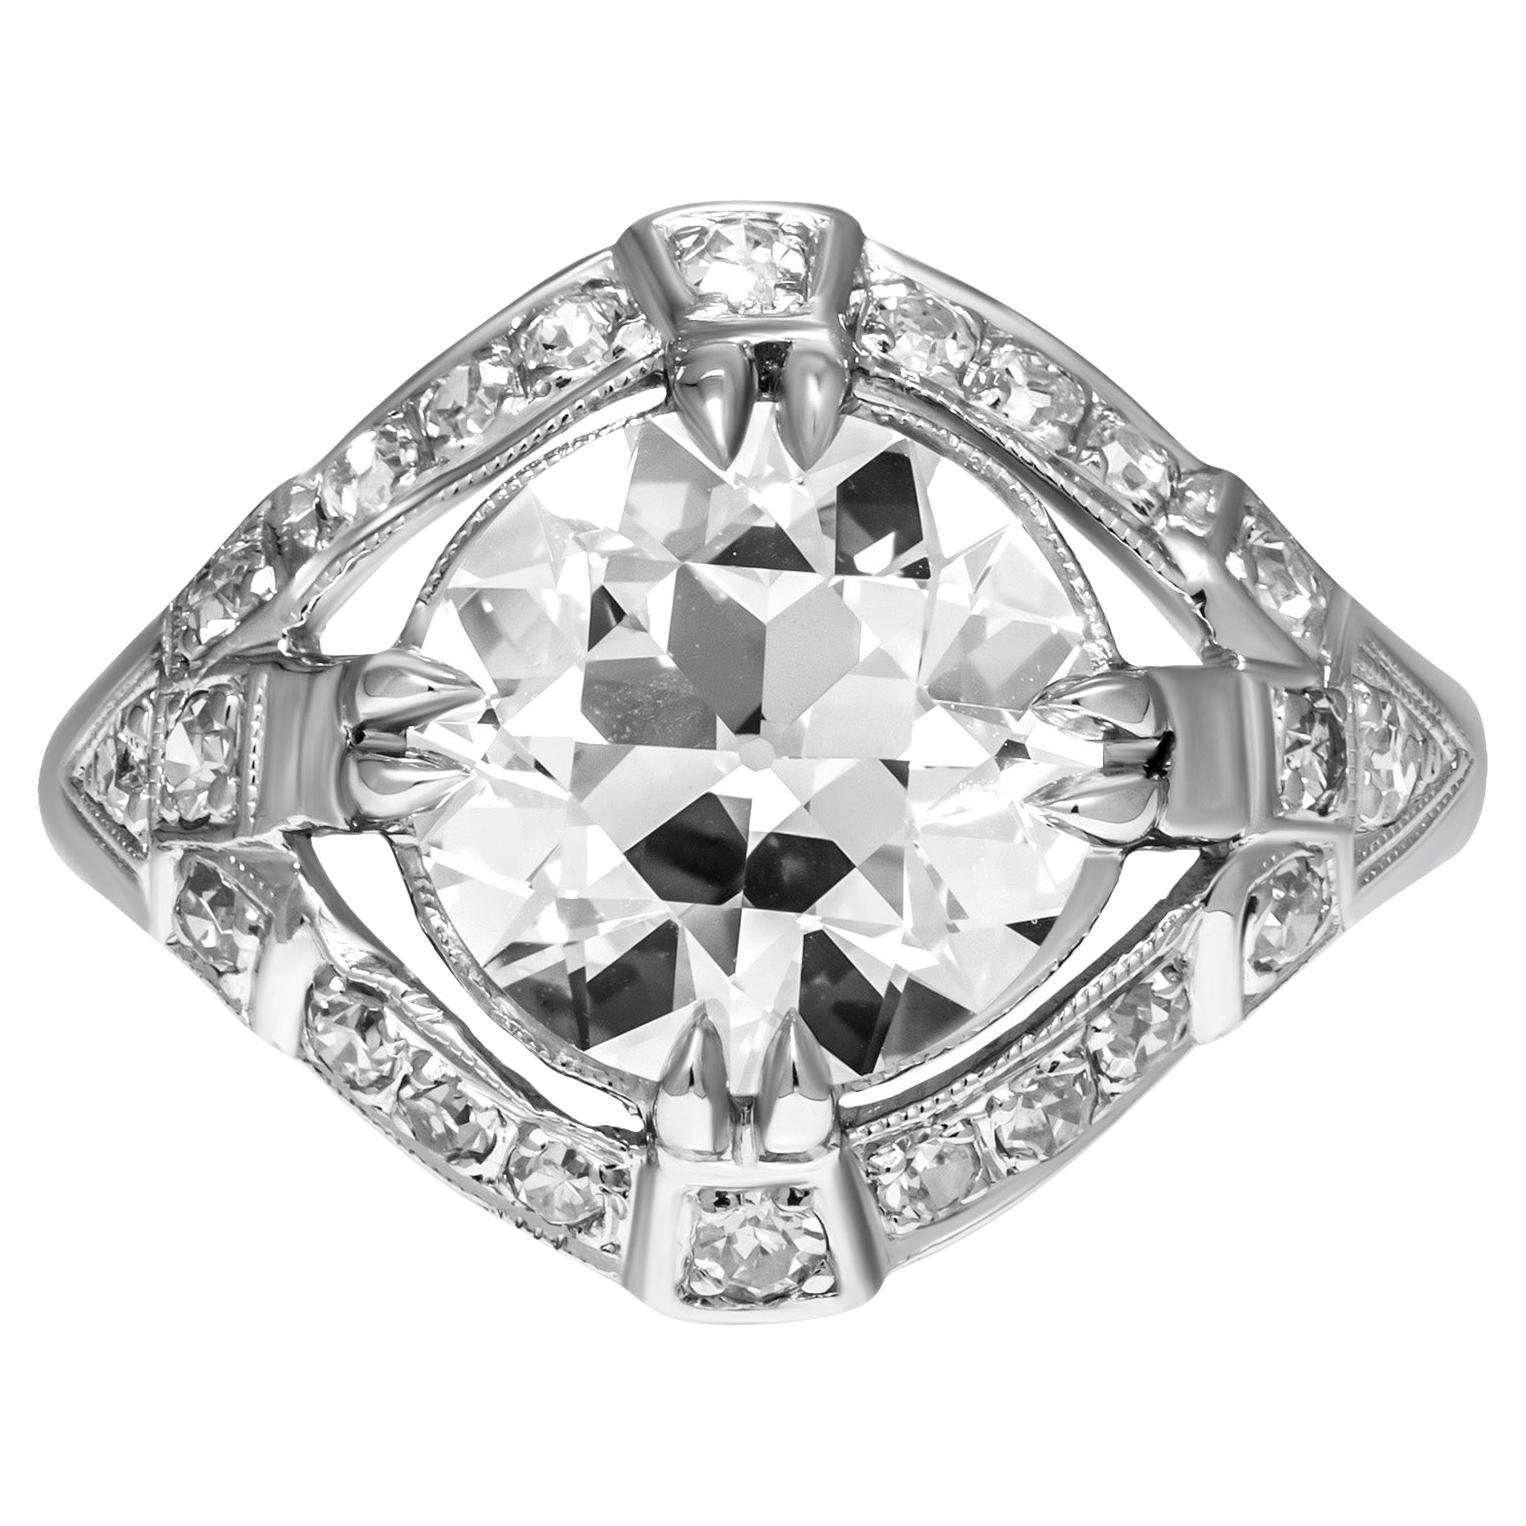 Antique Ring with 3.06ct Old Euro Cut Diamond in Platinum
Featuring Millgrain Pave work totaling aprox. 1.5ct F color VS clarity stones;
Mounted in Platinum 950;
Center Stone: 3.06ct F VVS2 Old European Cut Diamond GIA#5181843912